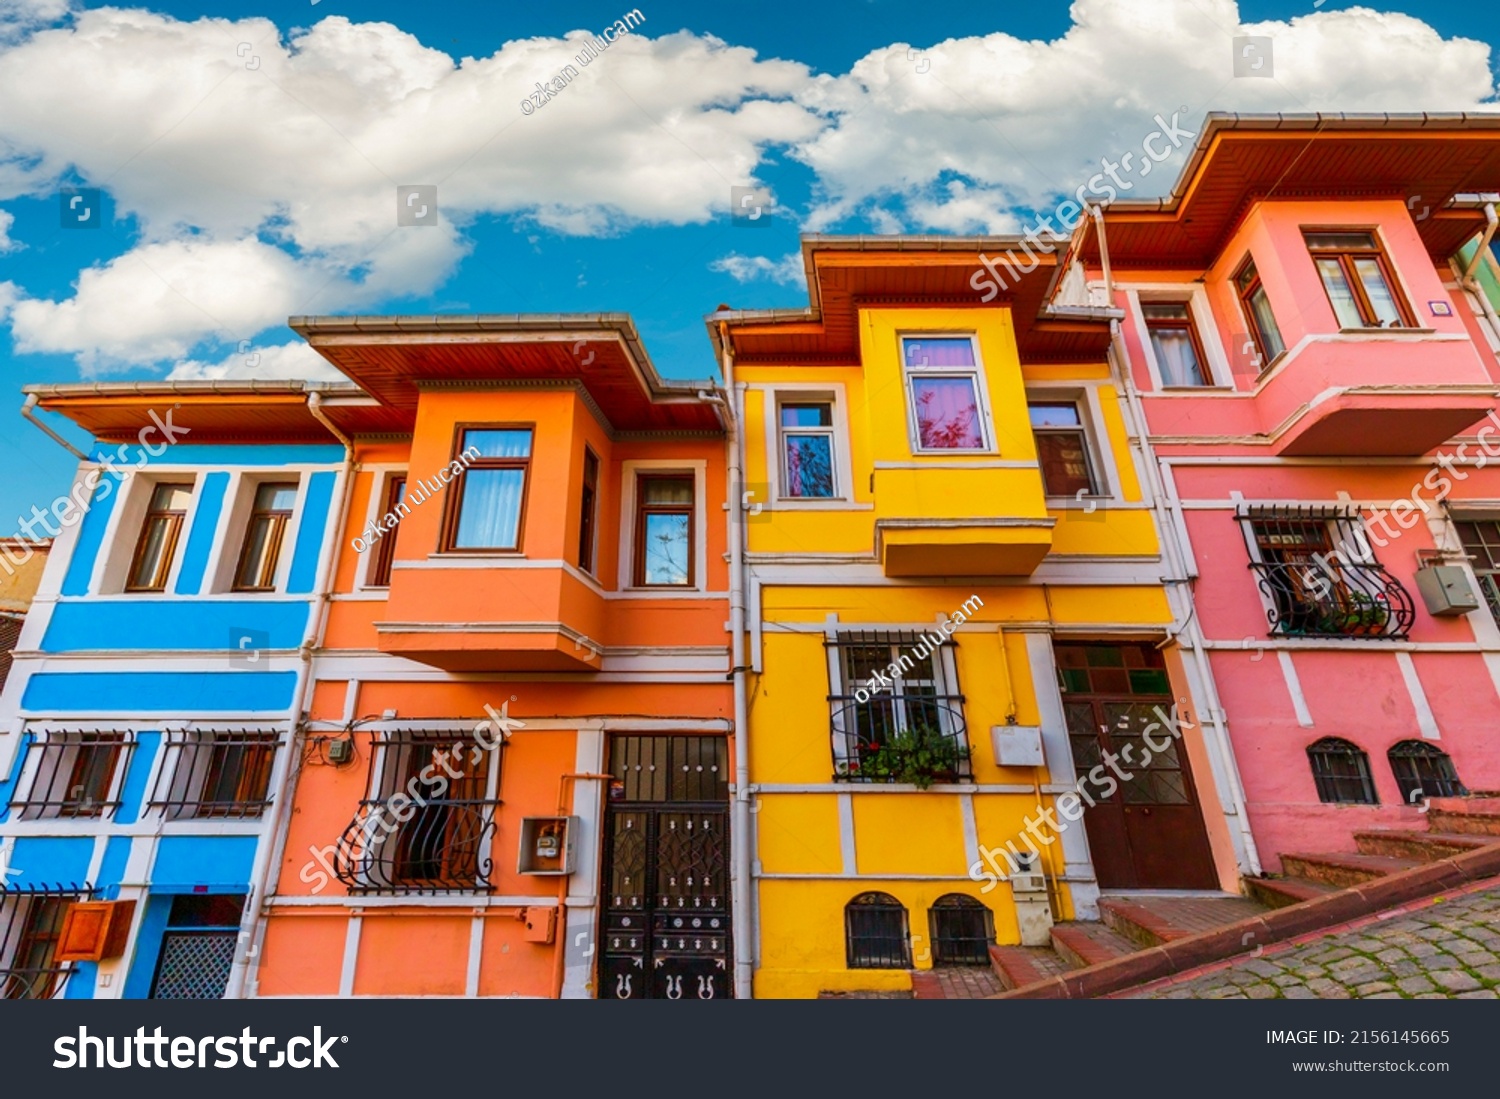 Beautiful colorful houses in Istanbul. Historical houses of Turkey belonging to the Ottoman period. View of colorful houses from the streets of Istanbul. summer landscape in the city. Balat, istanbul. #2156145665